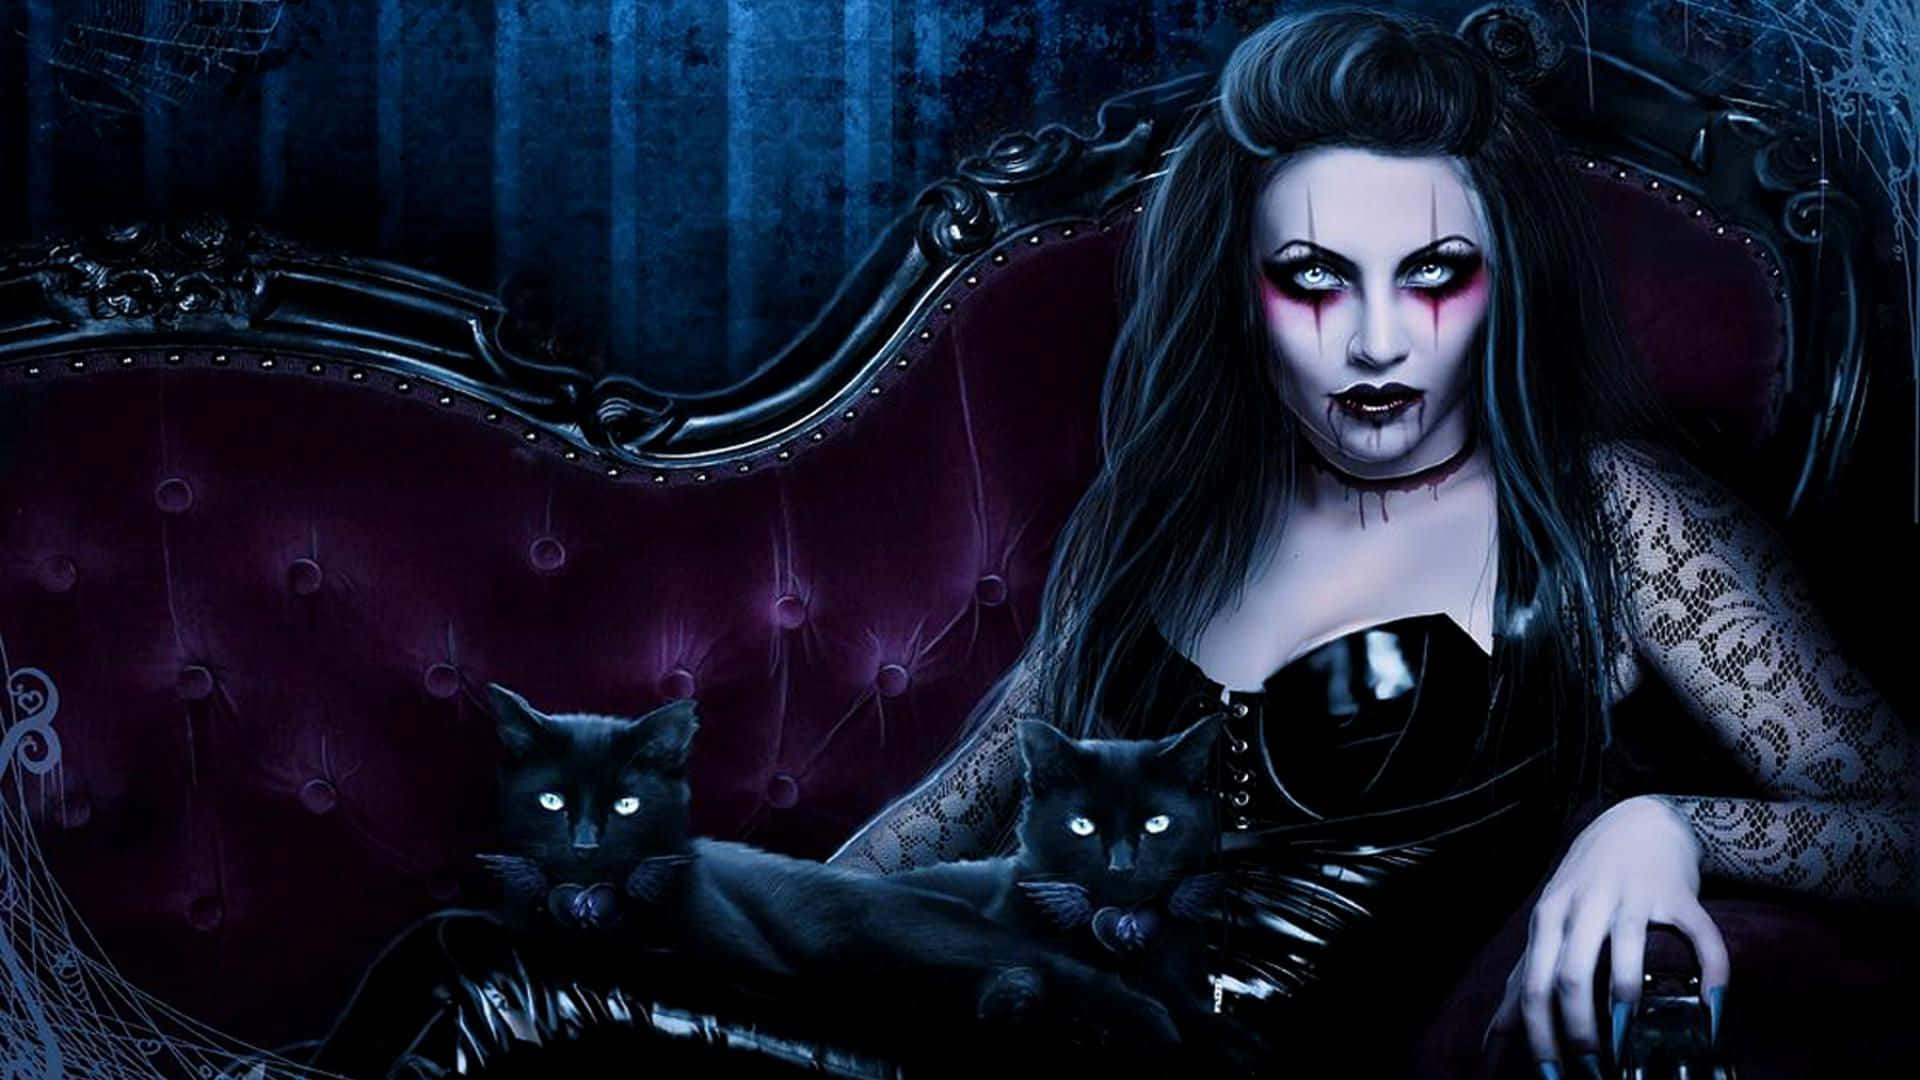 A Woman In Black Makeup Sitting On A Couch With Two Black Cats Wallpaper